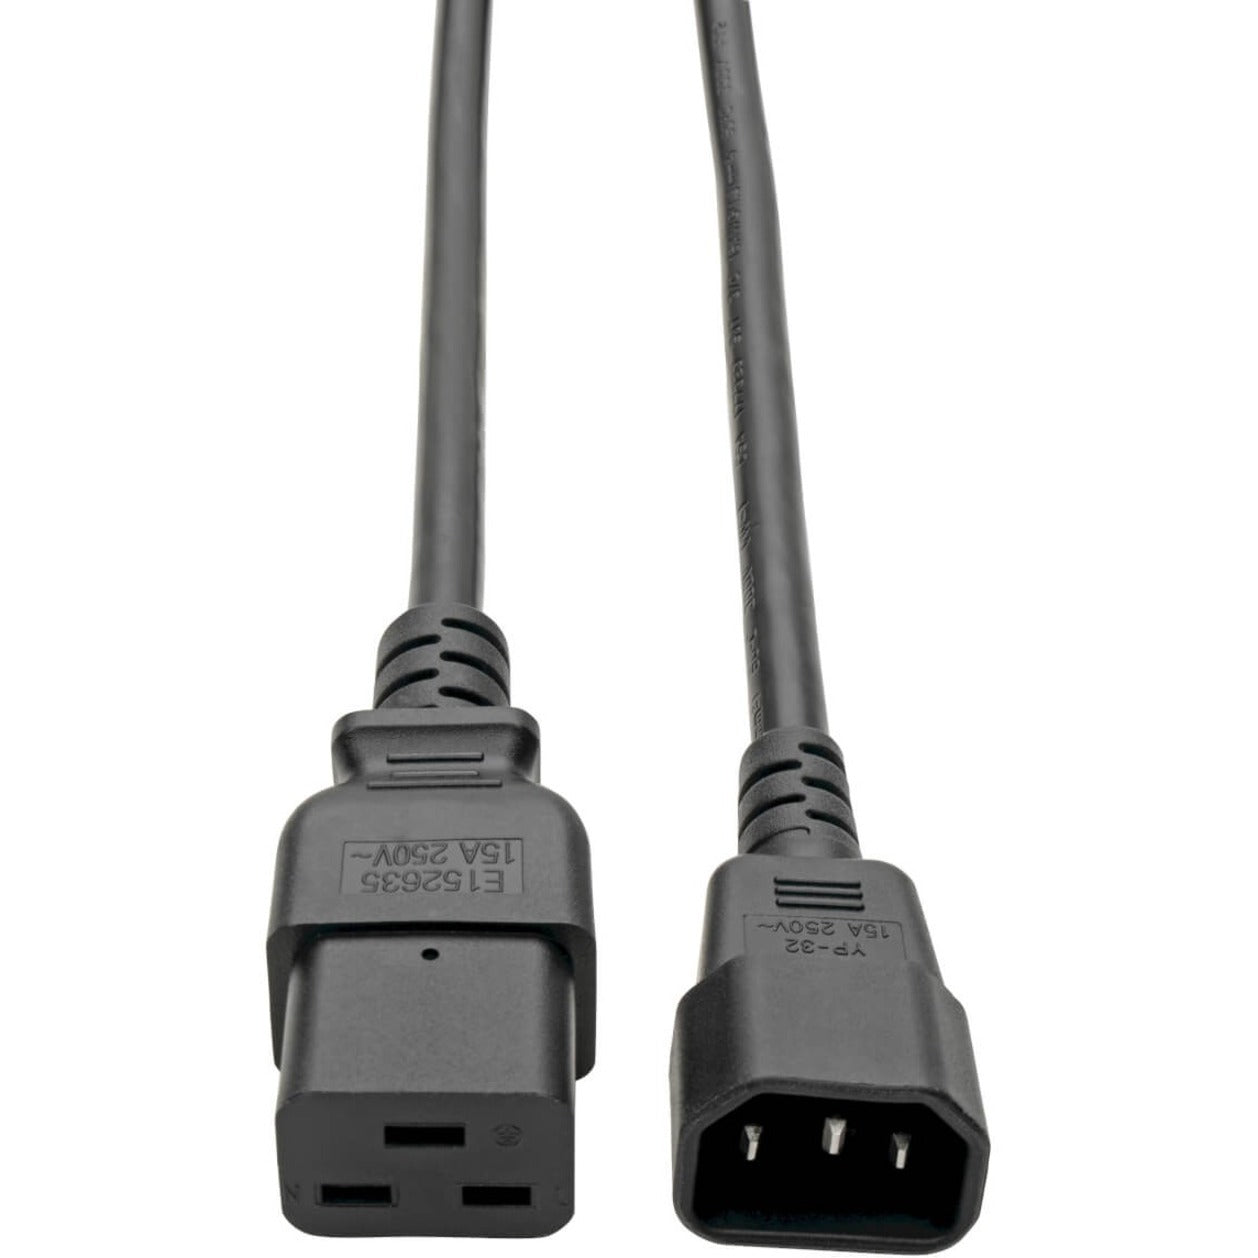 Tripp Lite P047-006 Power Interconnect Cable, 6 ft, 14 AWG, 15A, 250V AC